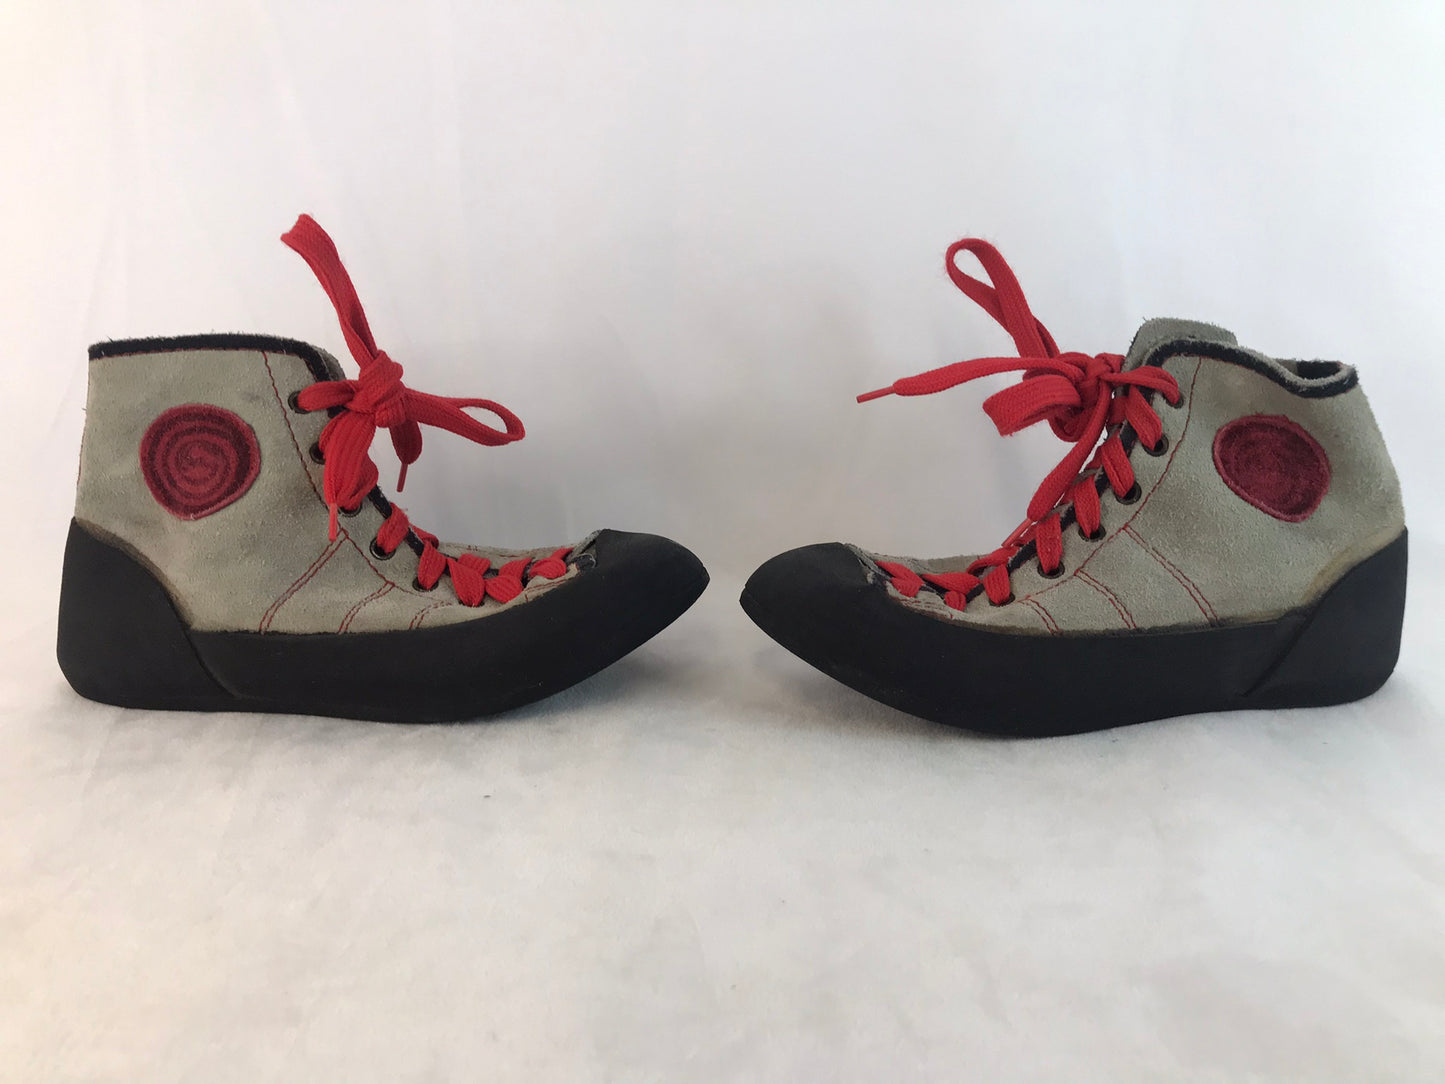 Rock Climbinging Shoes  Men's Size 5 Boreal Spain Leather Suade Black Red Excellent Quality